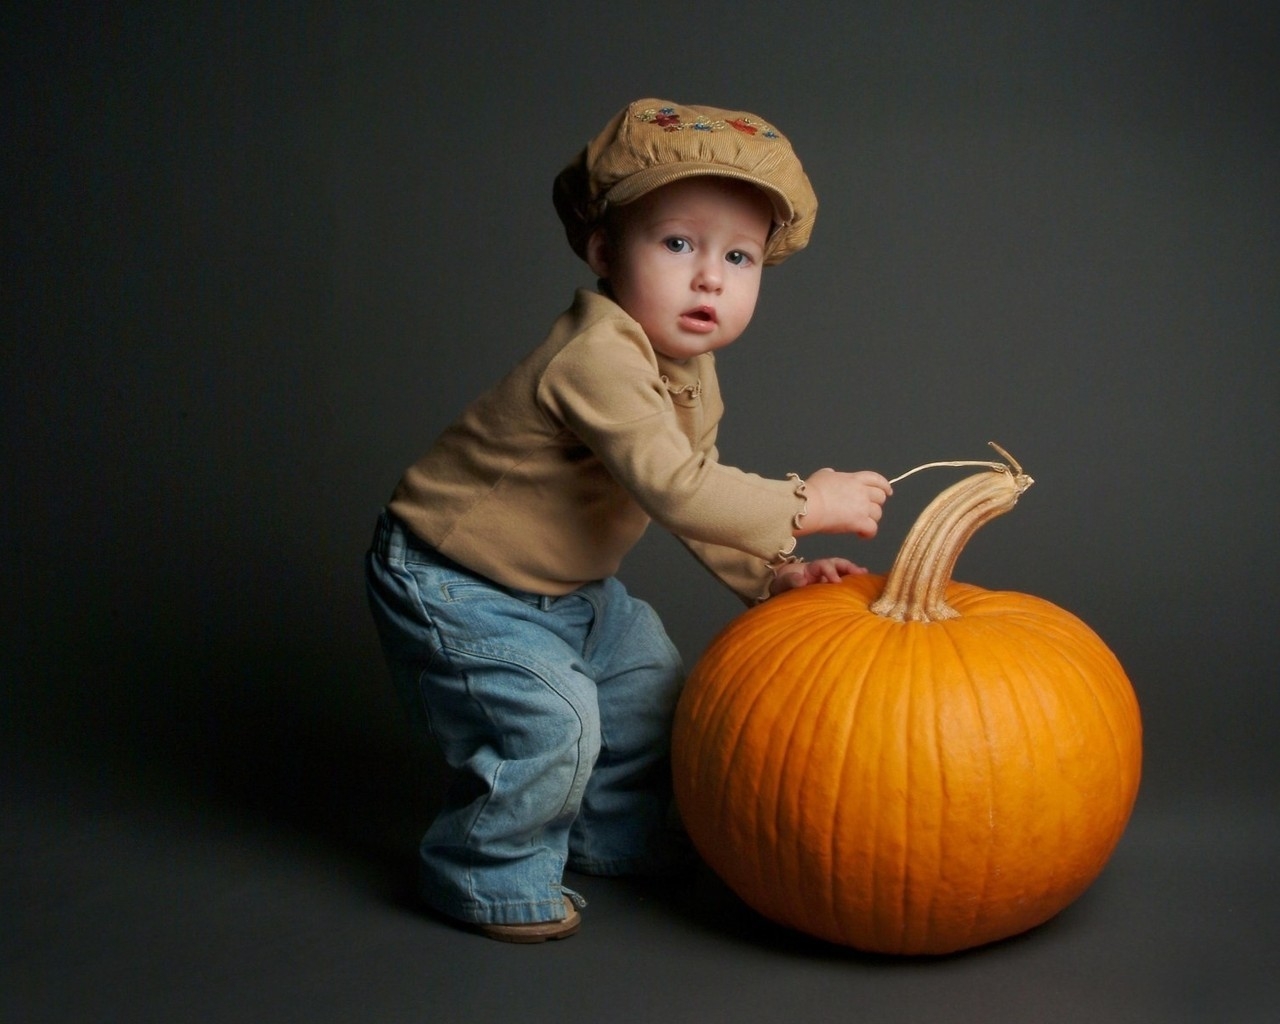 The Boy with Pumpkin for 1280 x 1024 resolution